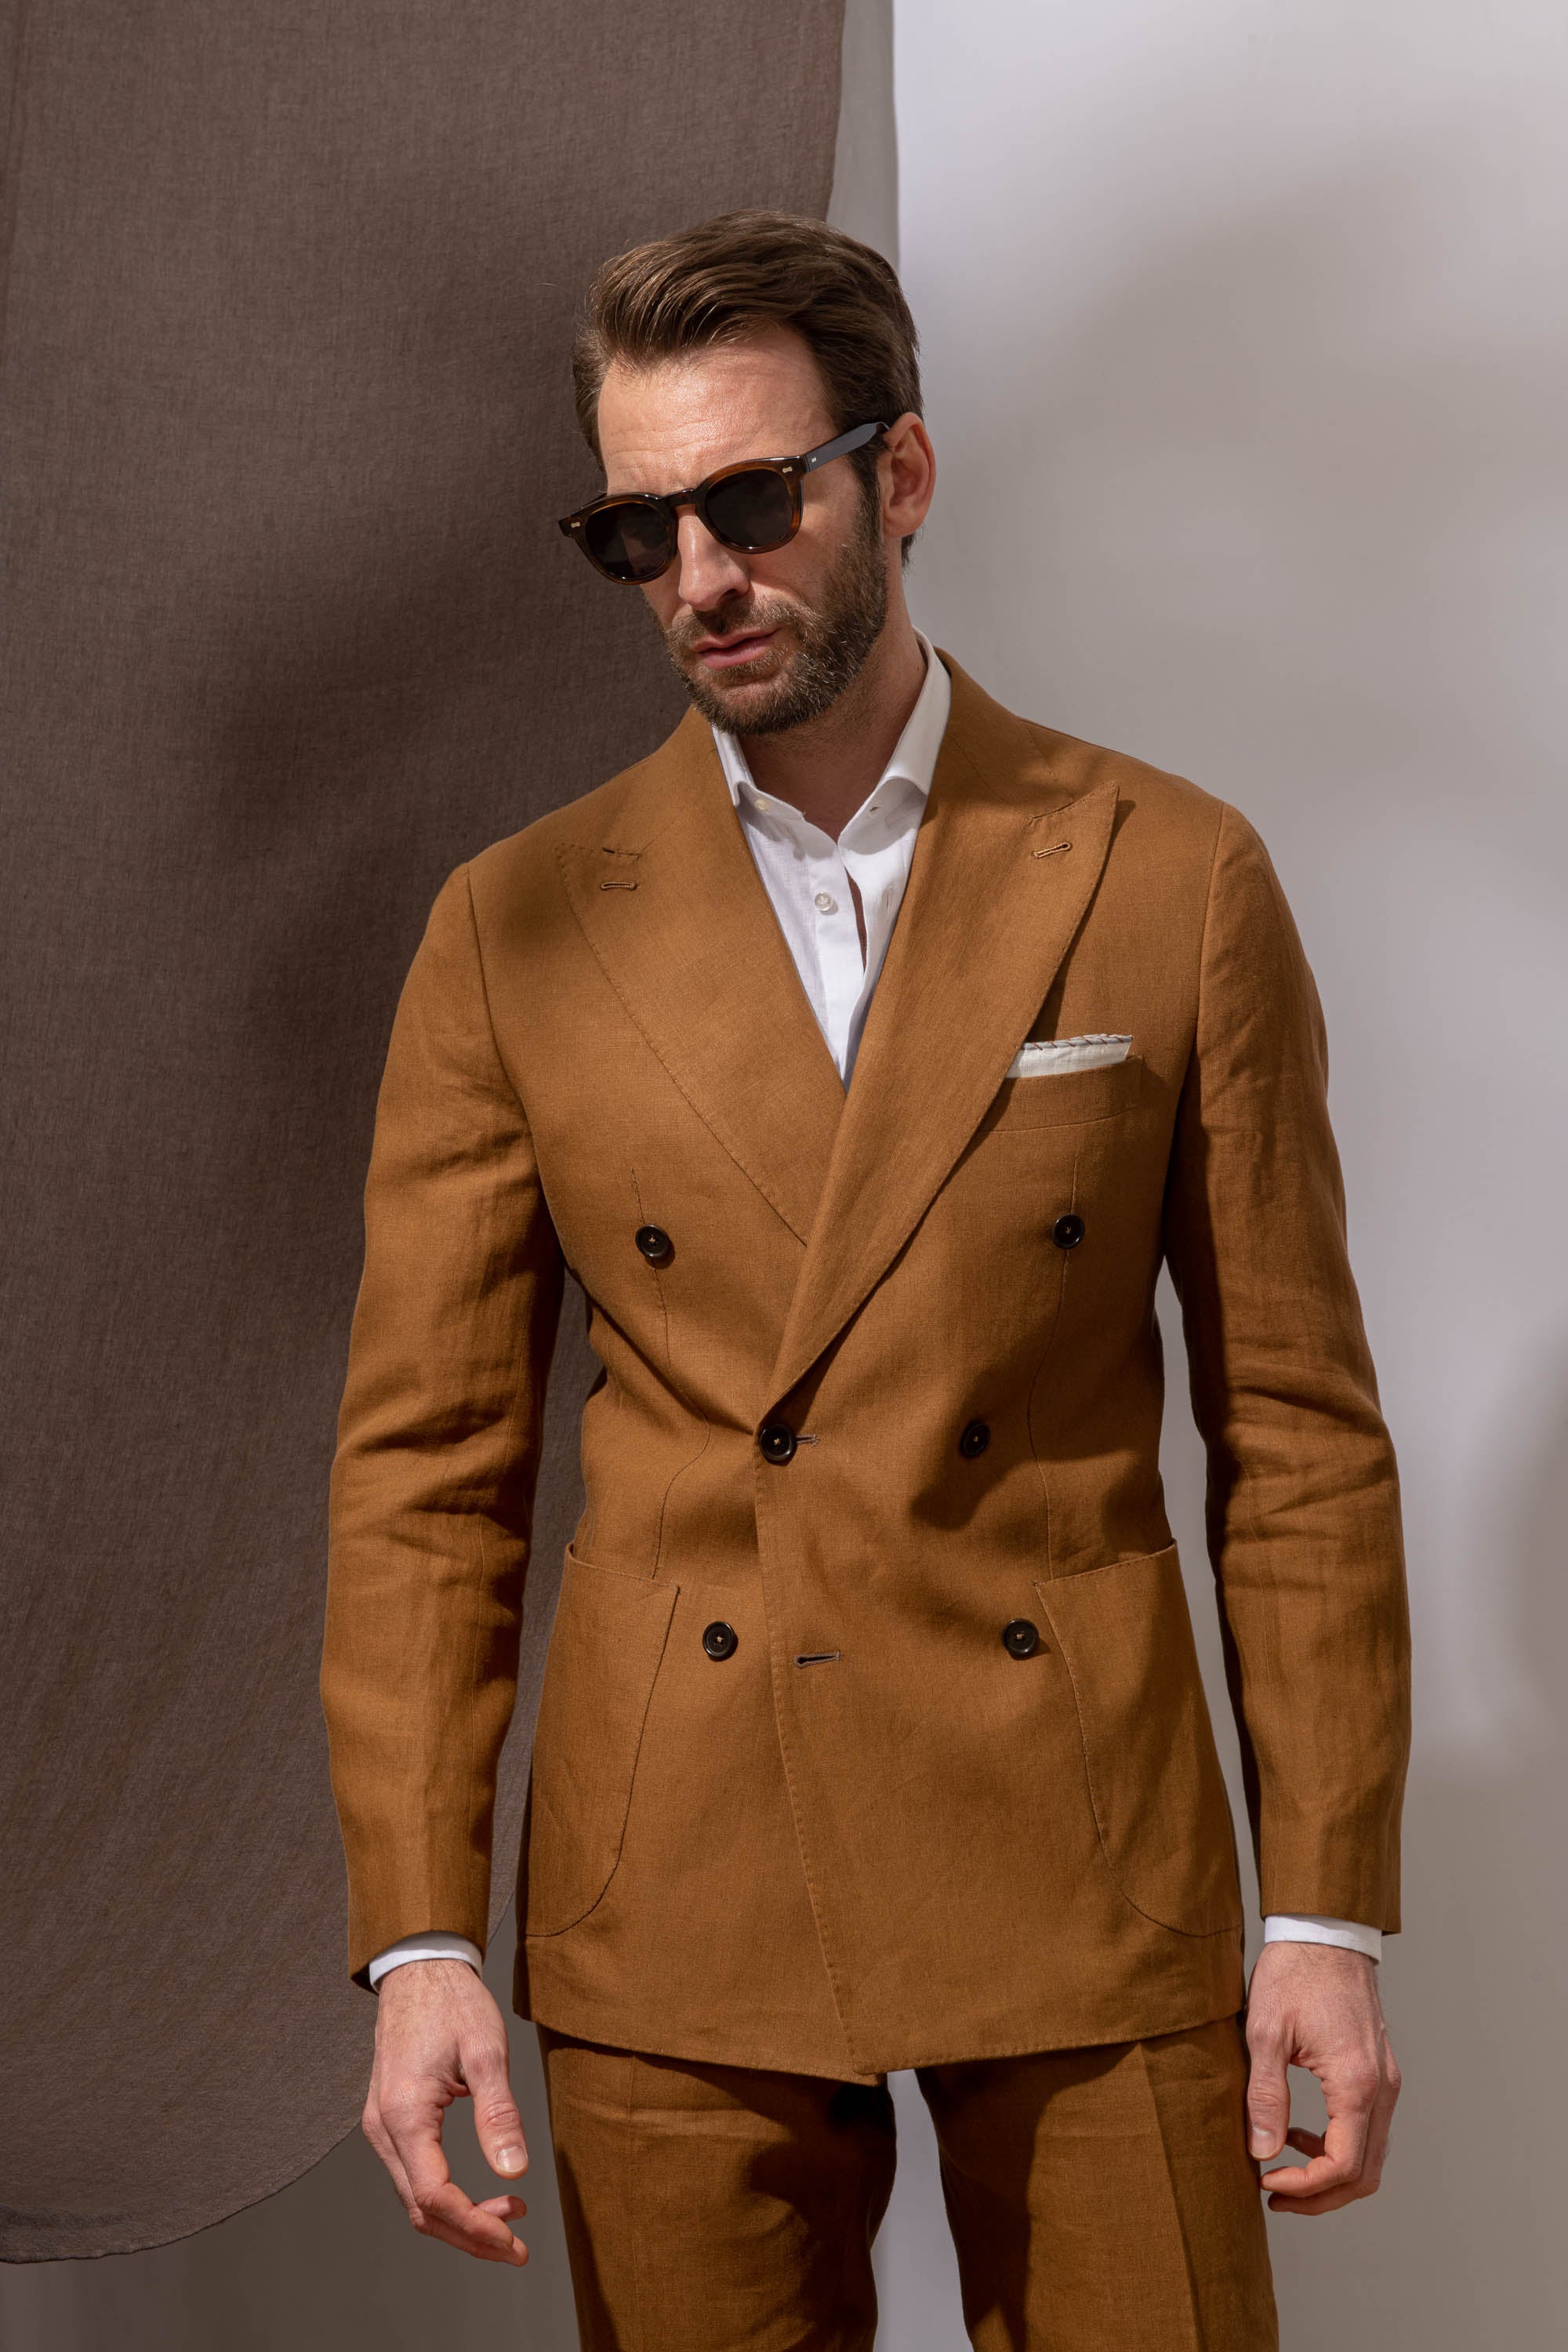 curry double breasted jacket, curry linen jacket, double breasted linen jacket, summer linen suit, linen suit for men, curry double breasted jacket, curry linen jacket for men's, double breasted linen jacket for men, men's summer linen suit,